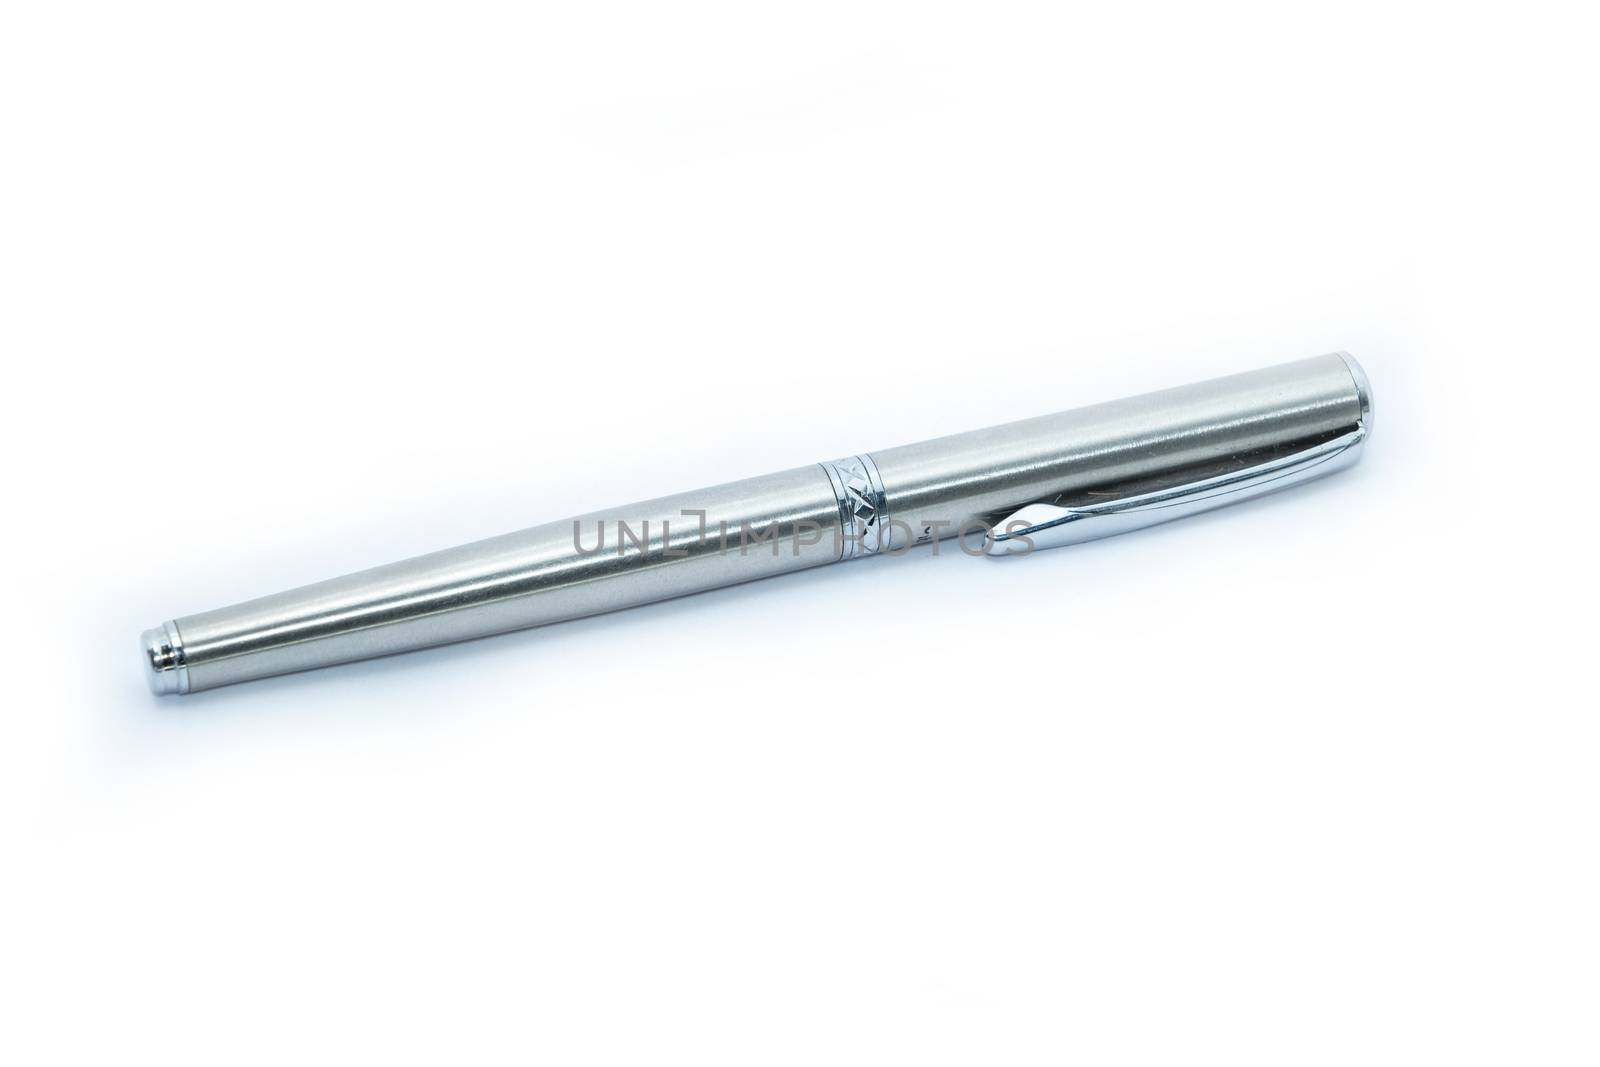 A Silver luxury pen mockup isolated on a white background. Nice pen.